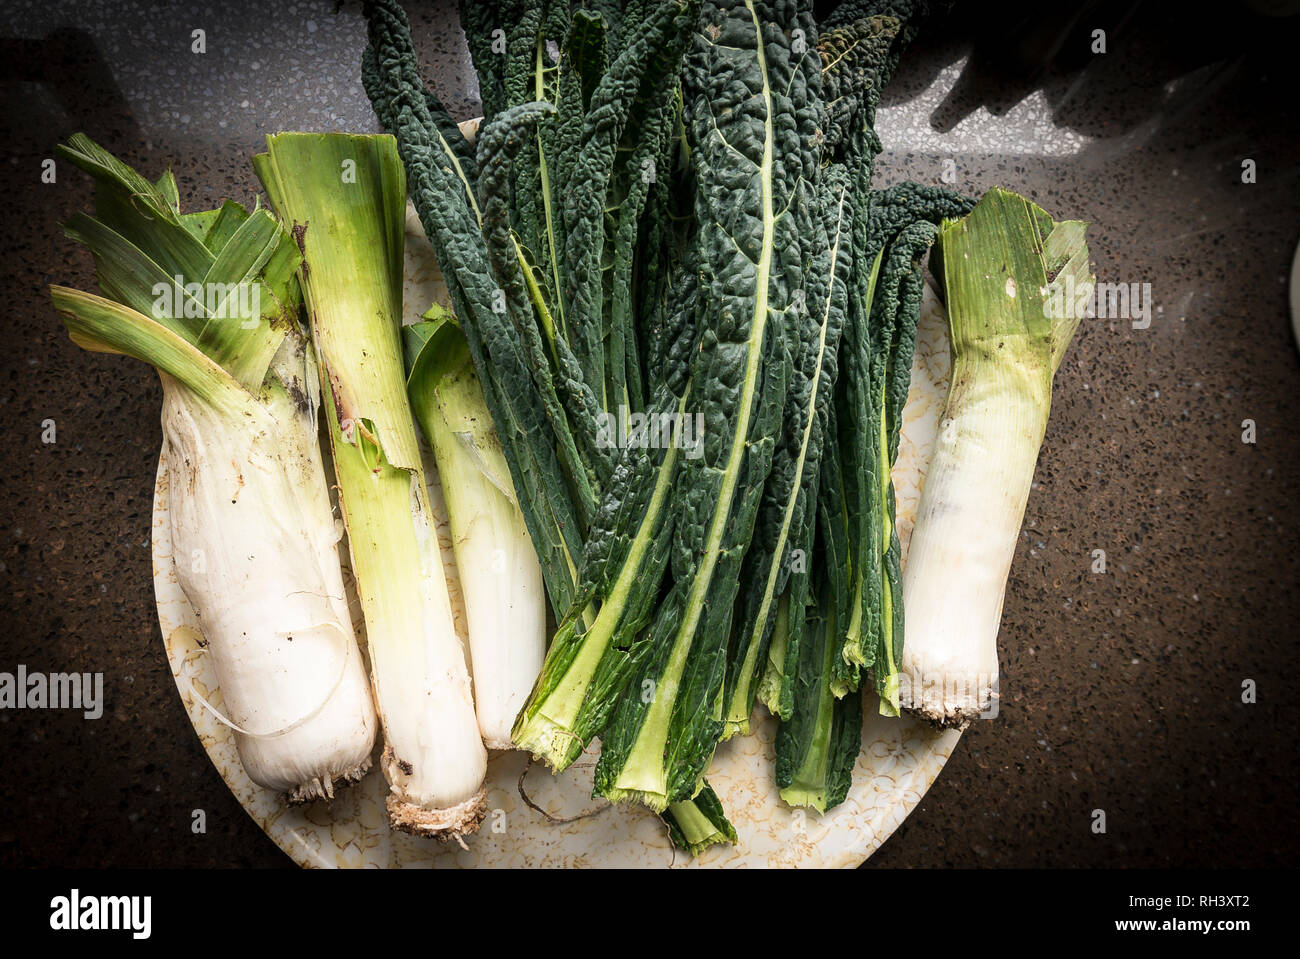 Freshly picked, trimmed and washed home-grown vegetables including Kale Black Tuscan and leeks - produce of a private English garden in UK Stock Photo